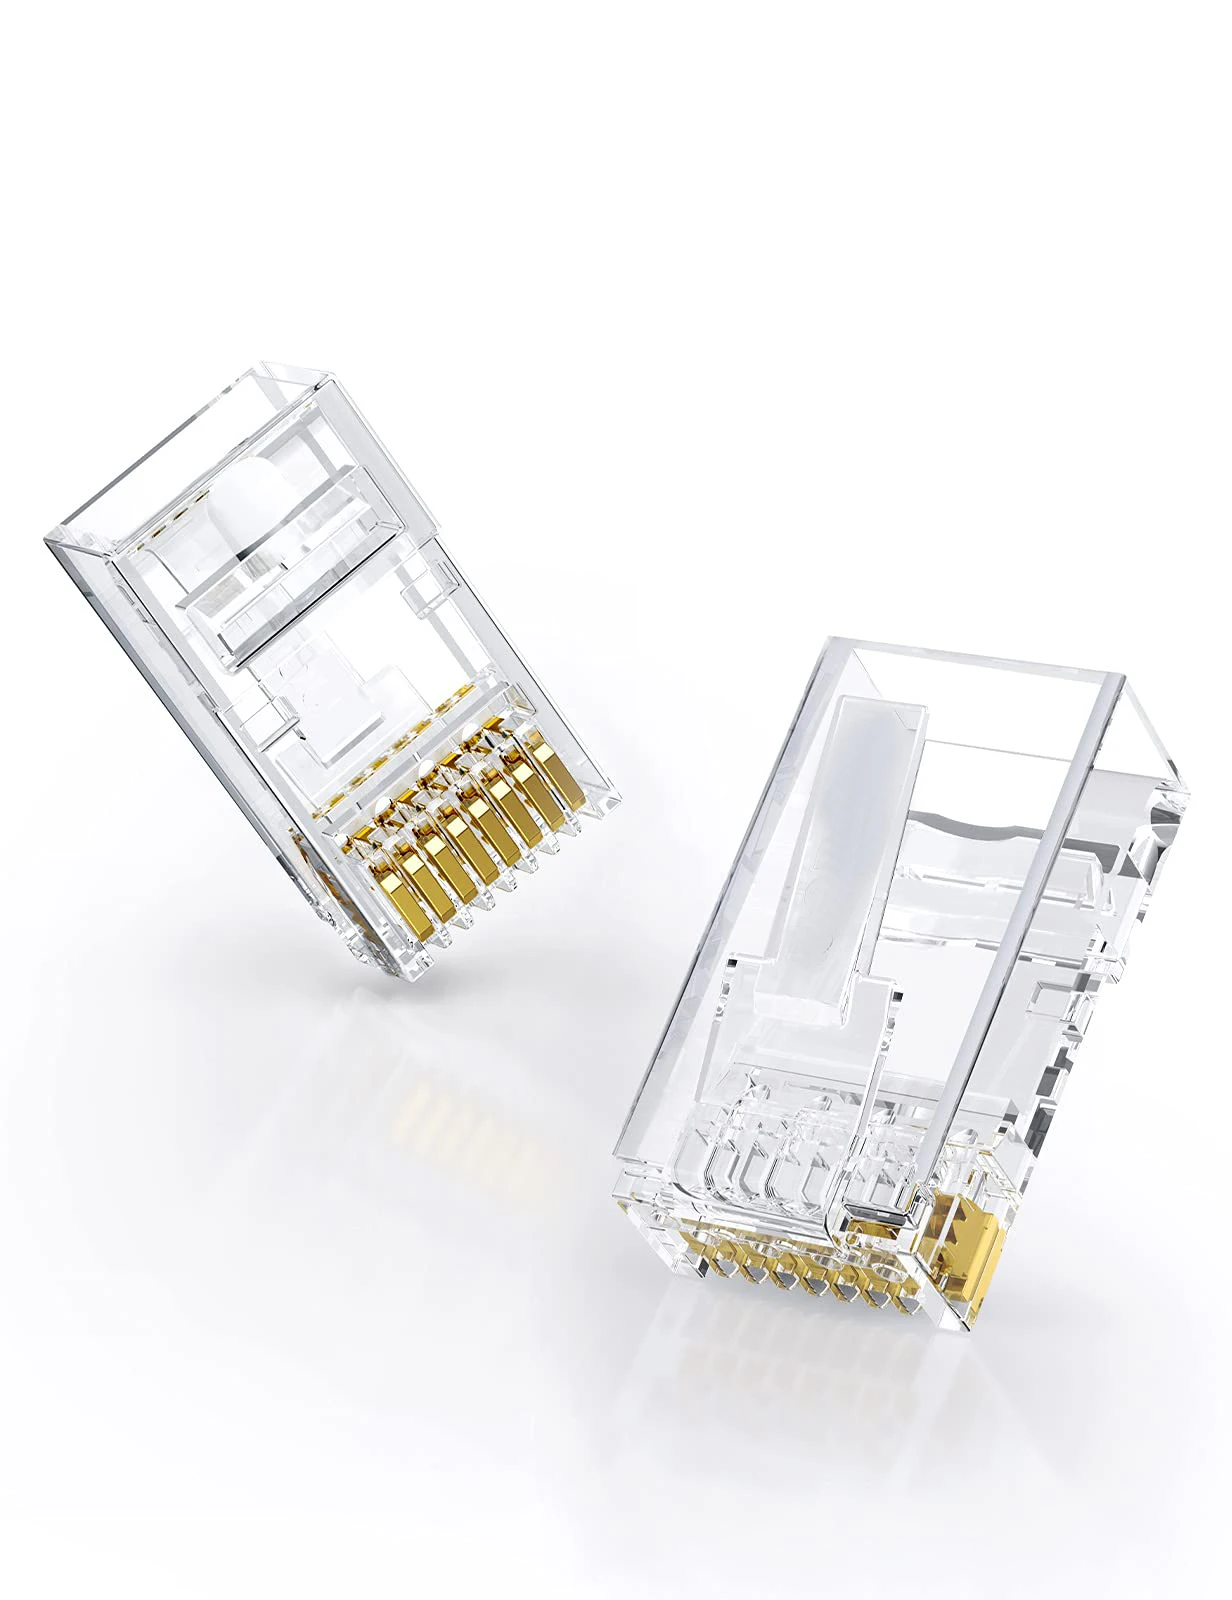 

Gold Plated Network Modular Plug Crimper RJ45 Ethernet Cable Head Connector Panel CAT6 LAN Internet Cafes Computers Routers